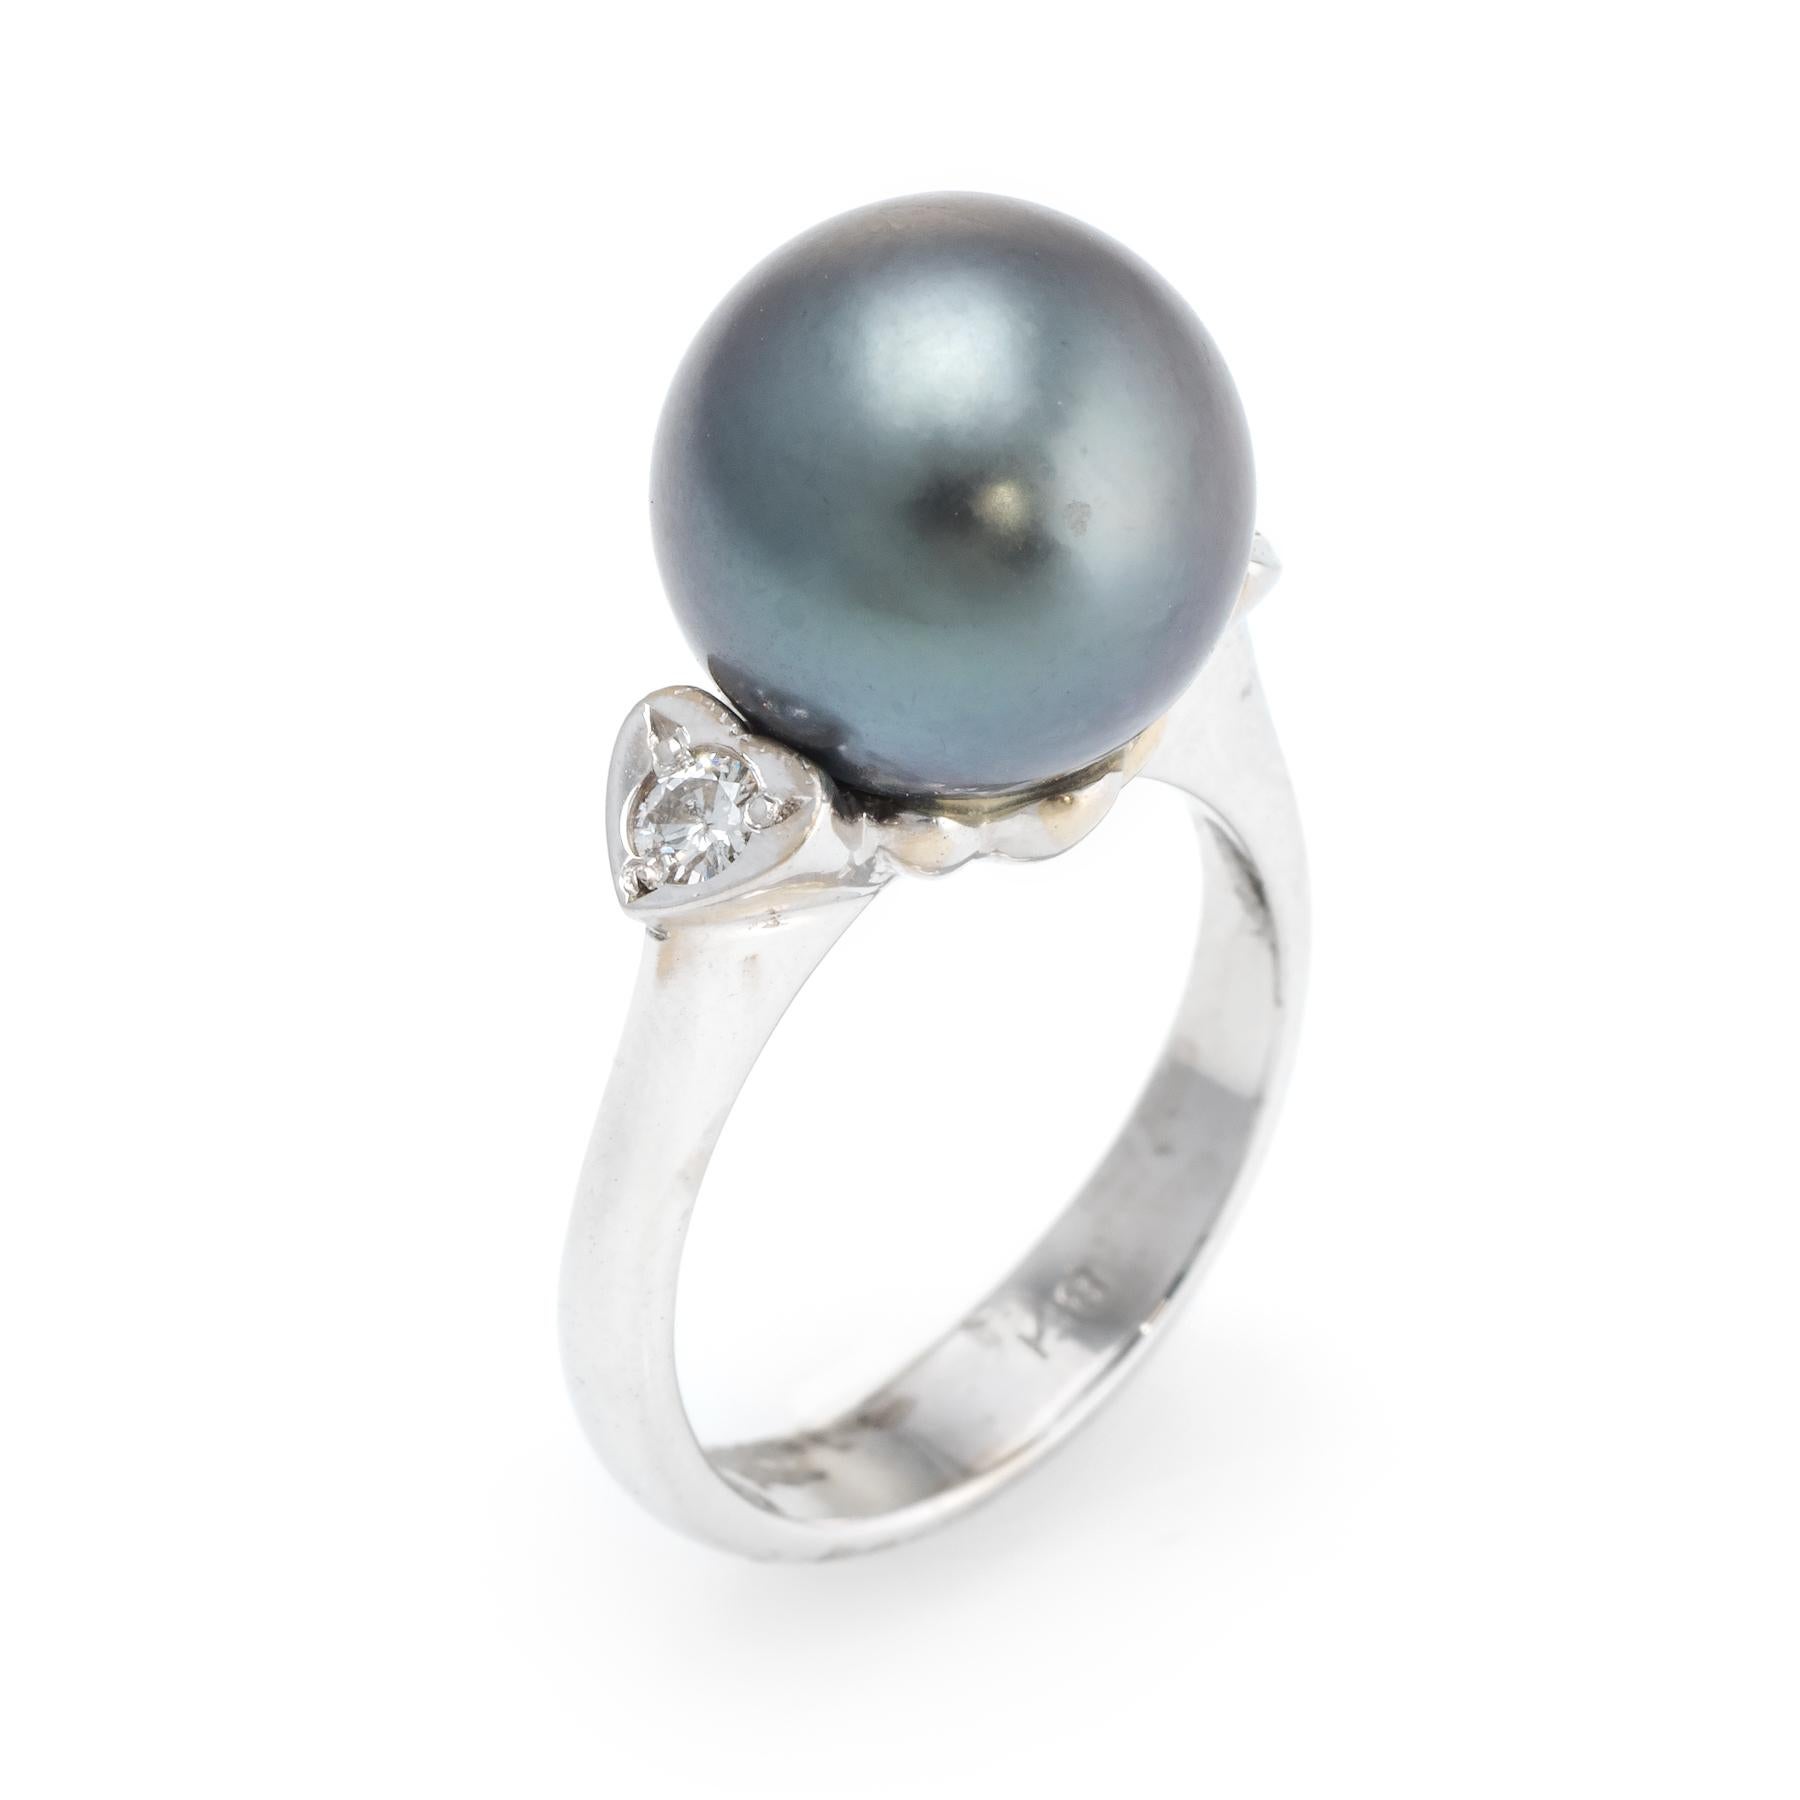 Elegant vintage cocktail ring, crafted in 18 karat white gold. 

Centrally mounted cultured Tahitian South Sea black pearl measures 11mm, accented with an estimated 0.10 carats of diamonds (estimated at I-J color and SI1 clarity). The pearl is in